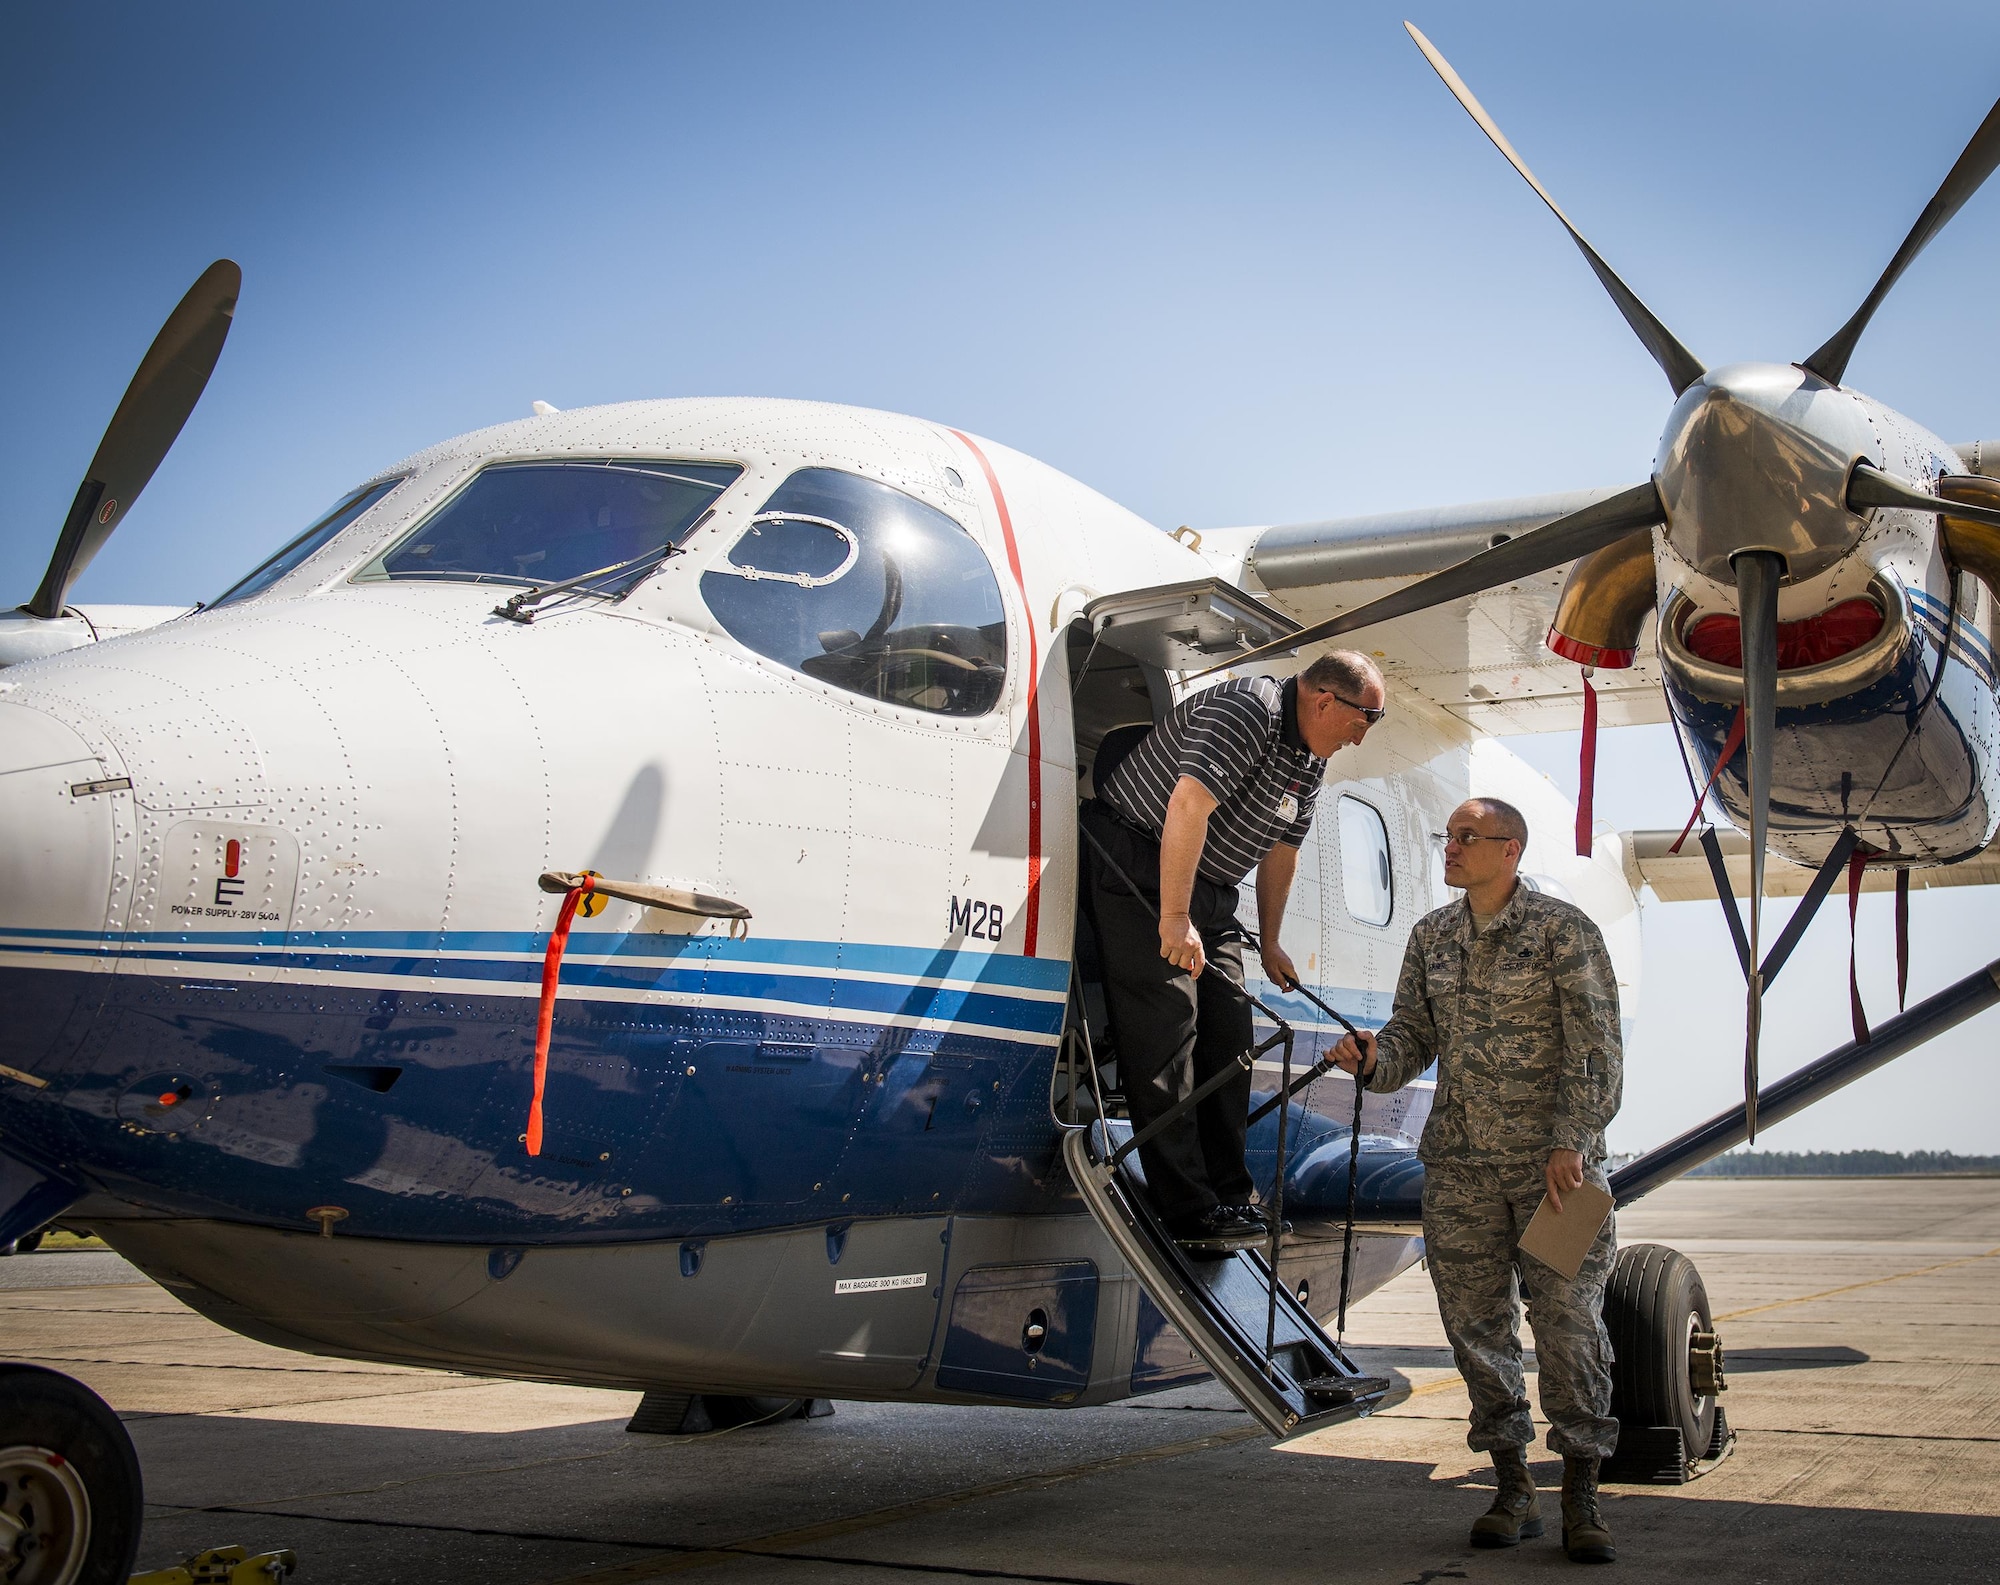 Dale Rice exits a C-145A Skytruck while talking with Maj. Terrell Eikner, the 919th Aircraft Maintenance Squadron commander, during the Crestview Military Affairs Committee’s tour of Duke Field, Fla., March 23.  (U.S. Air Force photo/Tech. Sgt. Samuel King Jr.)